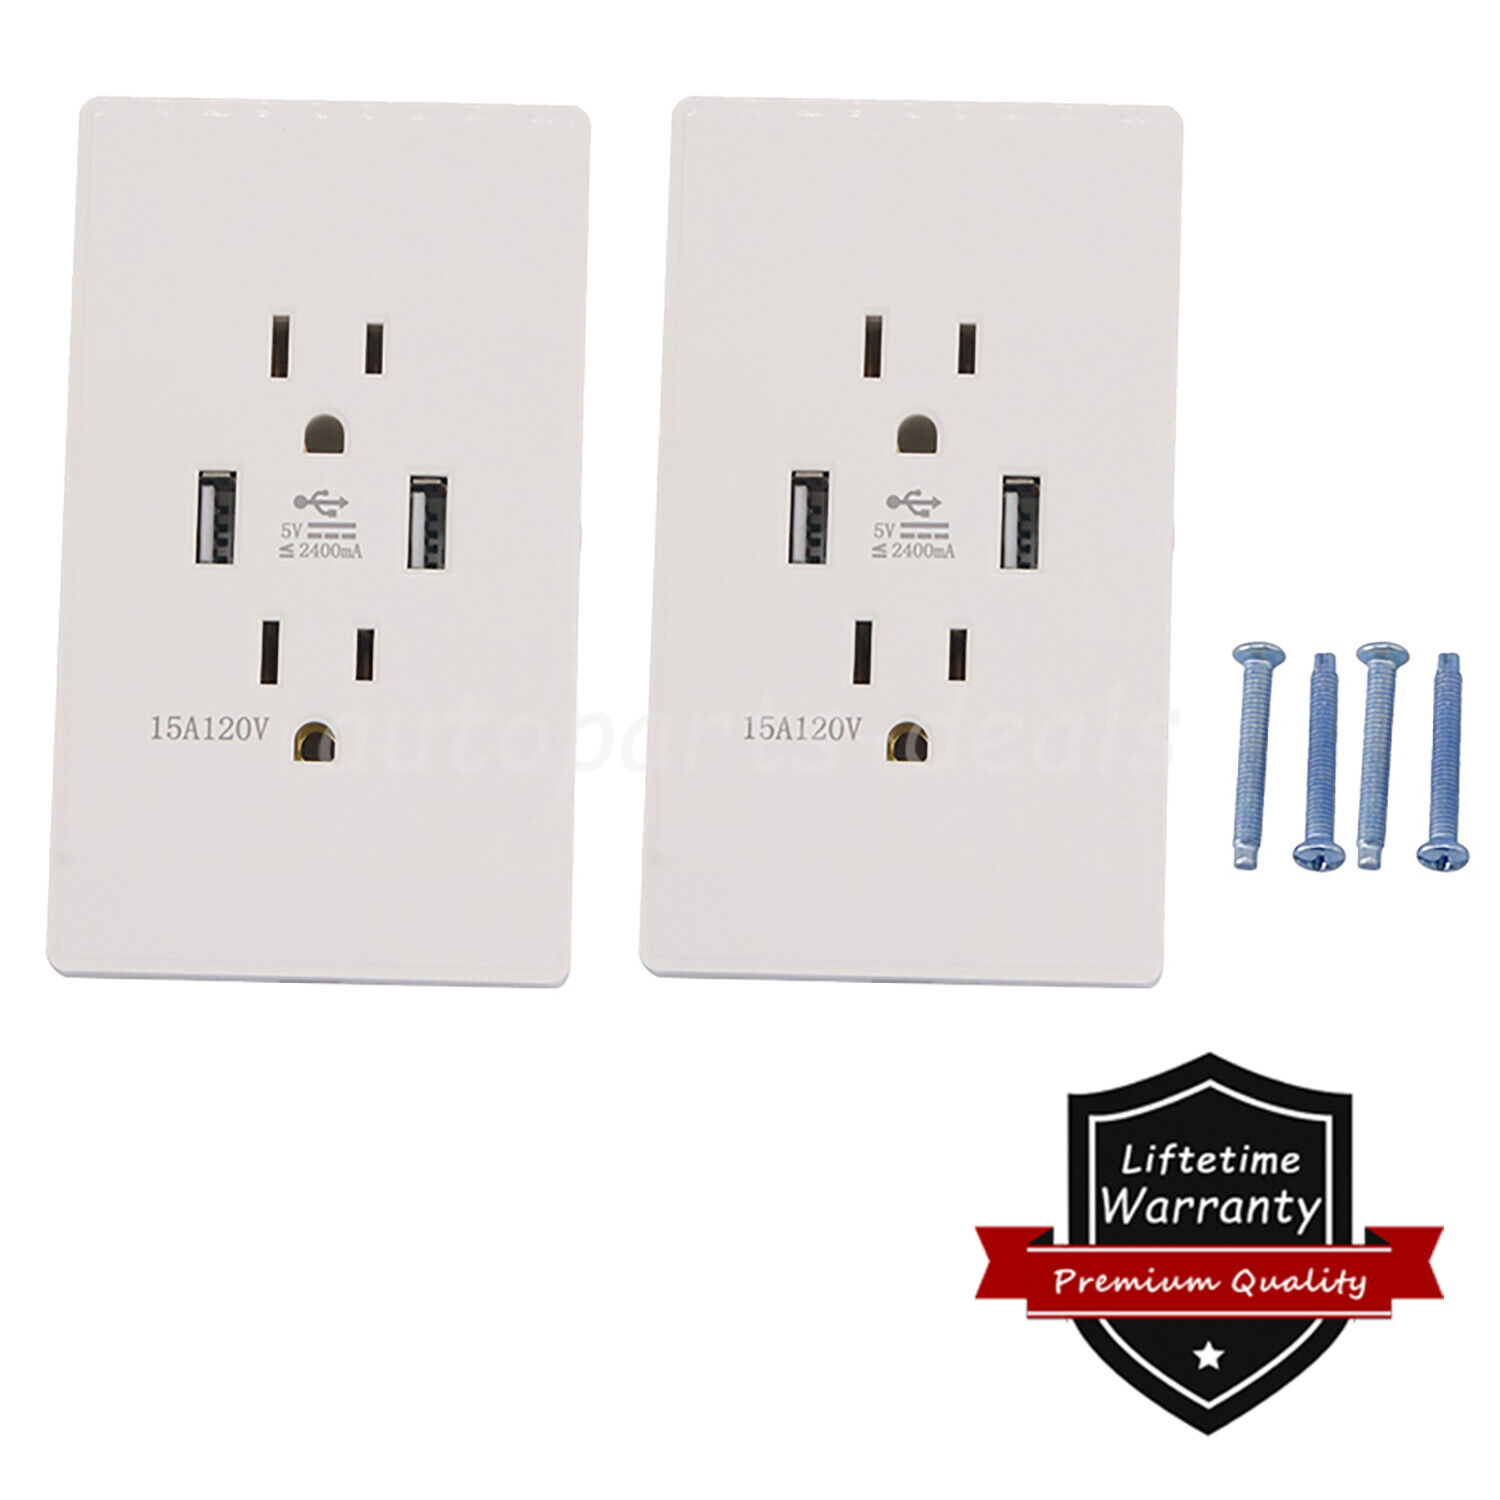 Dual USB Wall Outlet Port 15A Power Socket Charger AC Receptacle Plate Panel 110